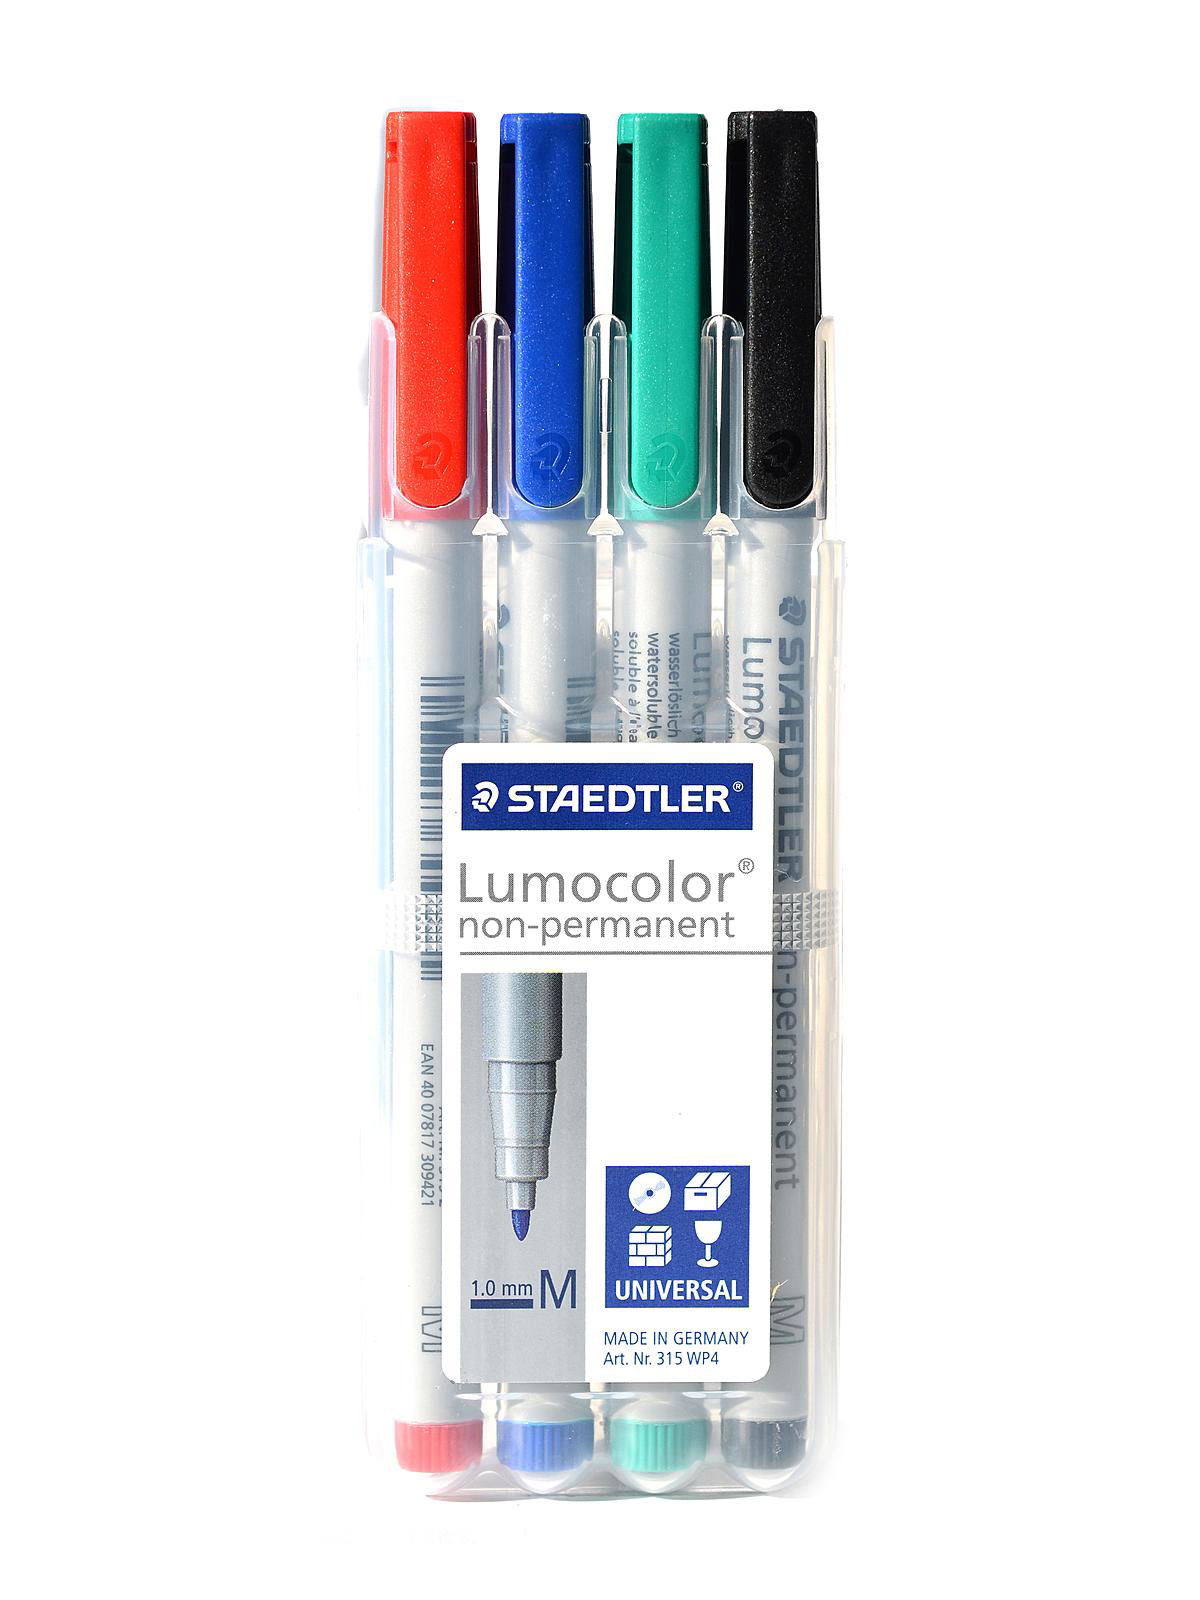 Staedtler 316-9 Lumocolor Non-Permanent Markers, 0.6mm Fine Point, Box of 10